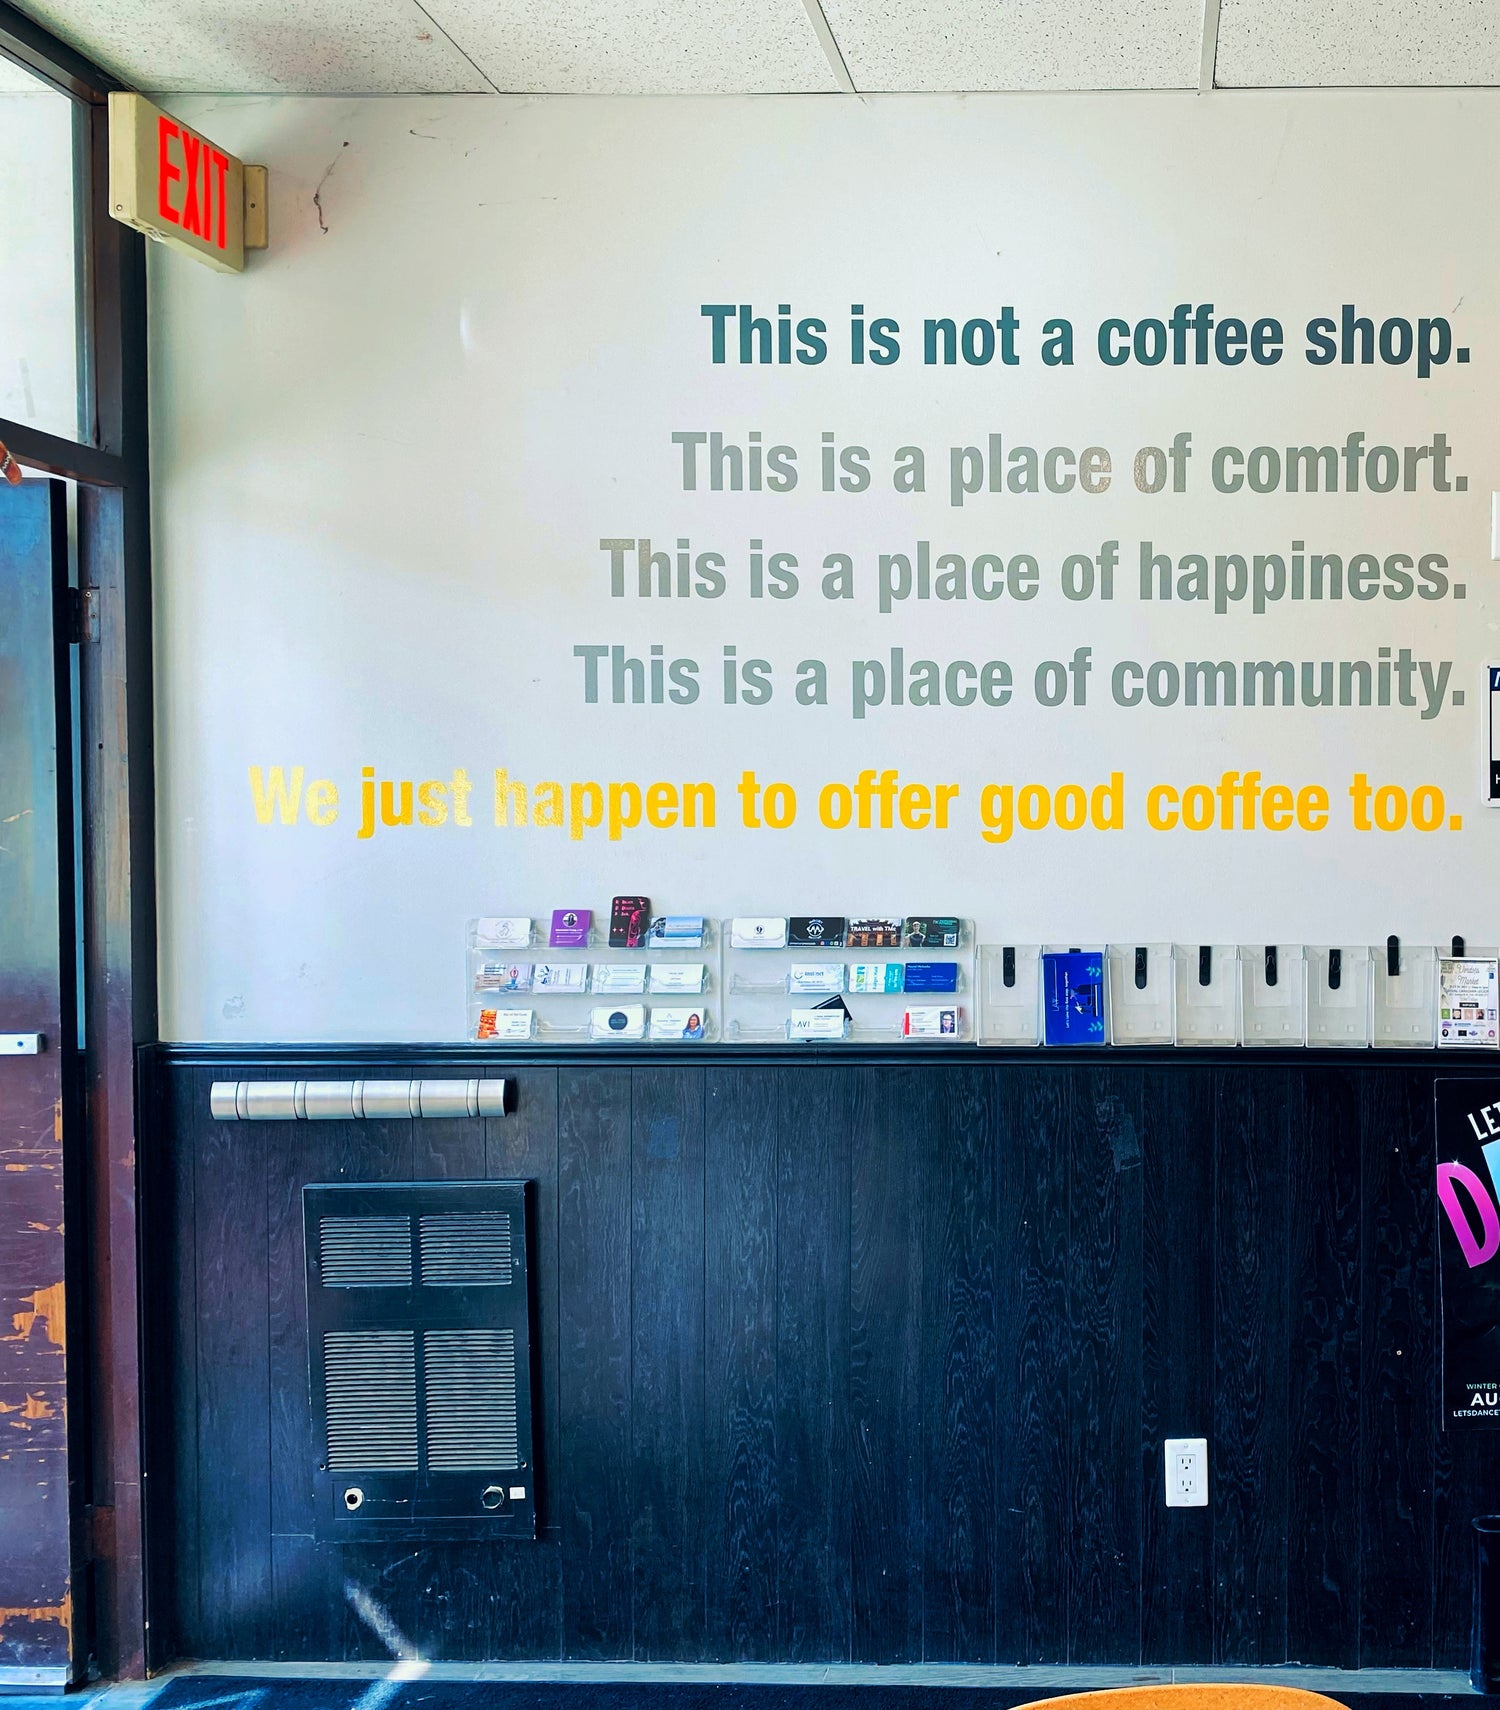 Our coffee shop philosophy